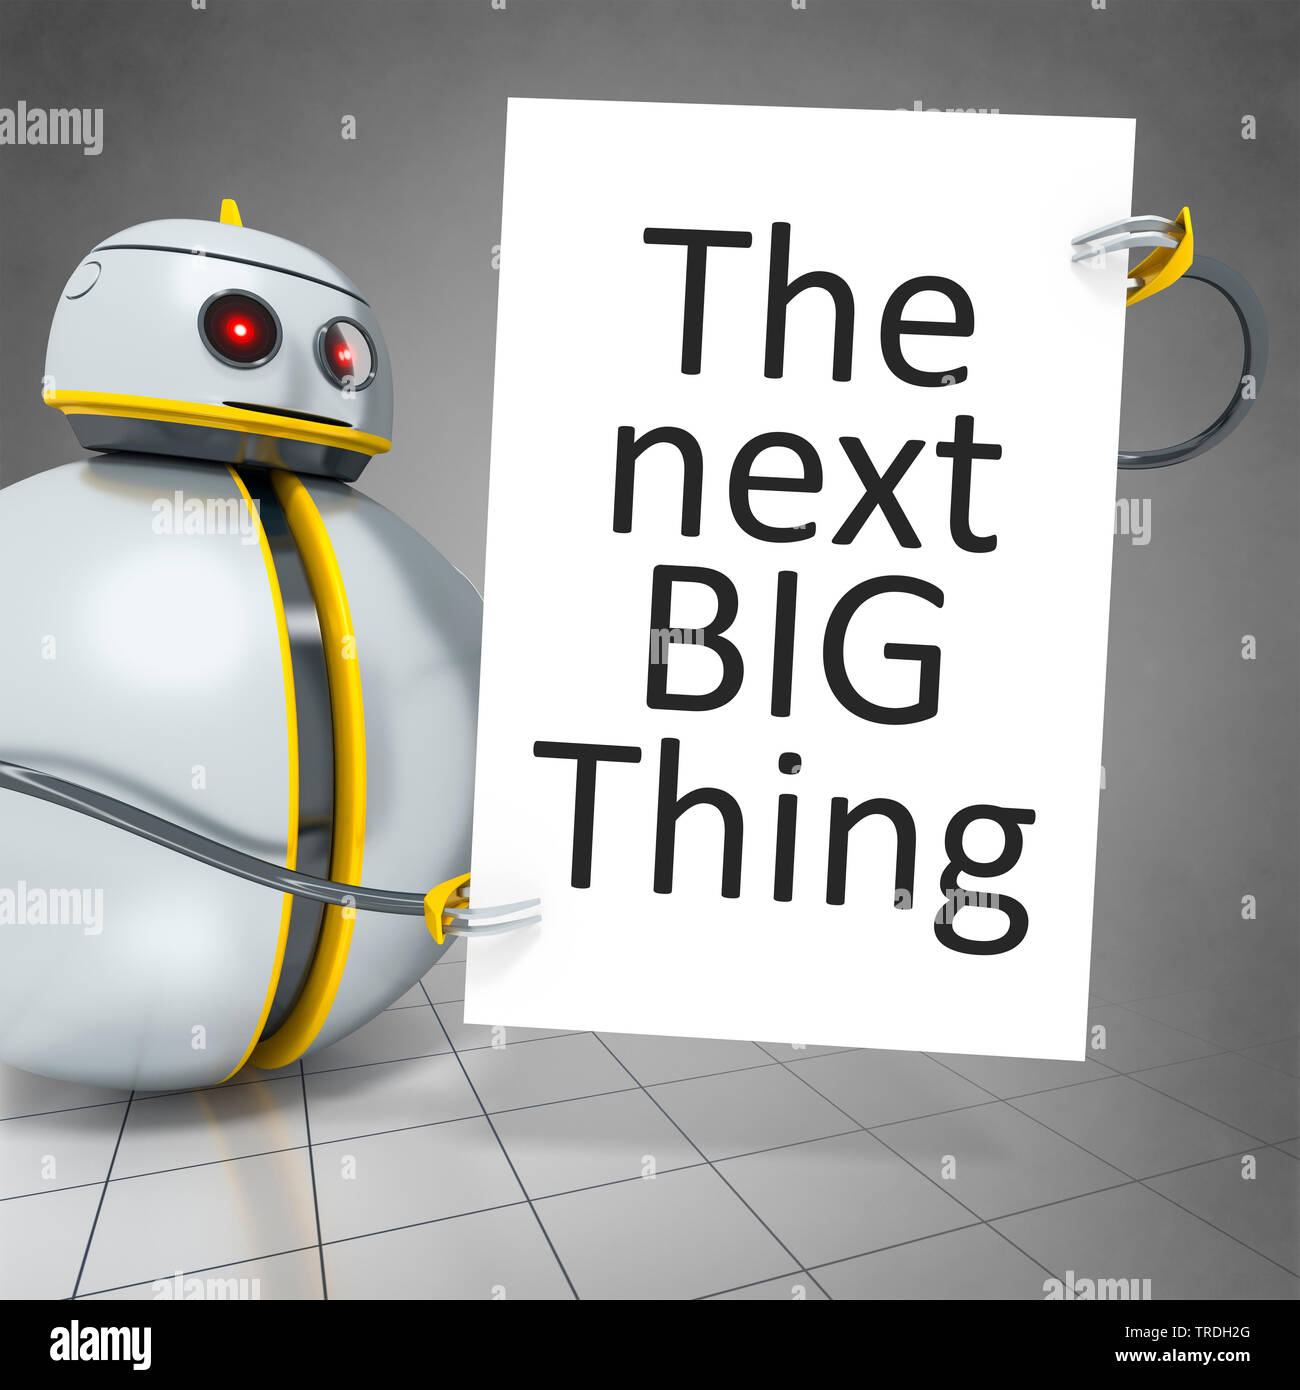 3D computer graphic, round cute robot holding a sign lettering THE NEXT BIG THING Stock Photo